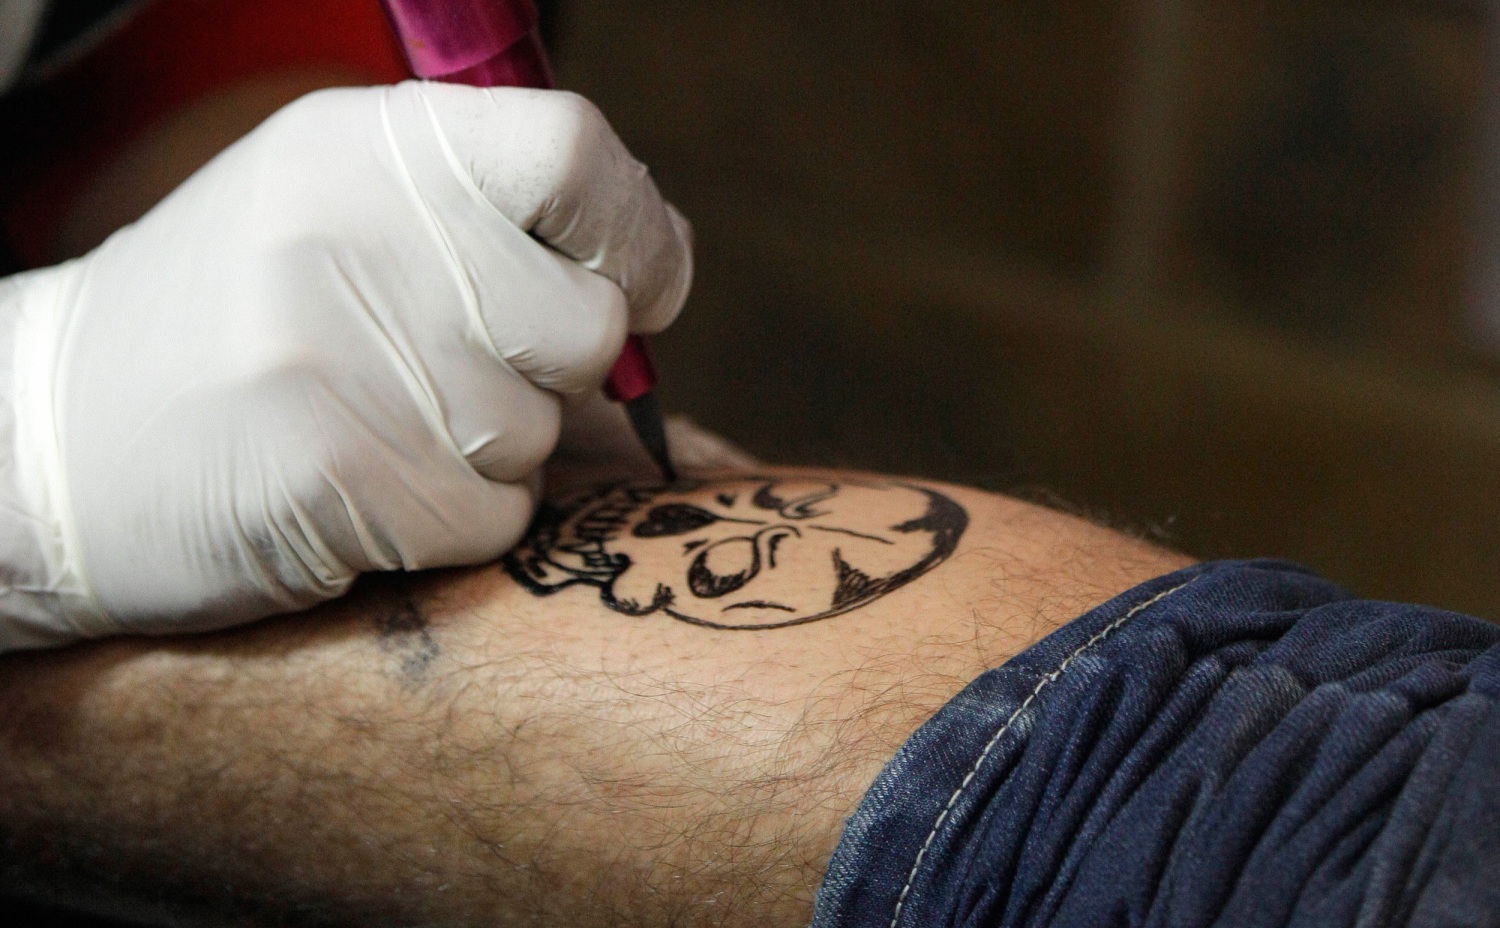 Tattoo Removal Creams: A Guide for Beginners | LaserAll